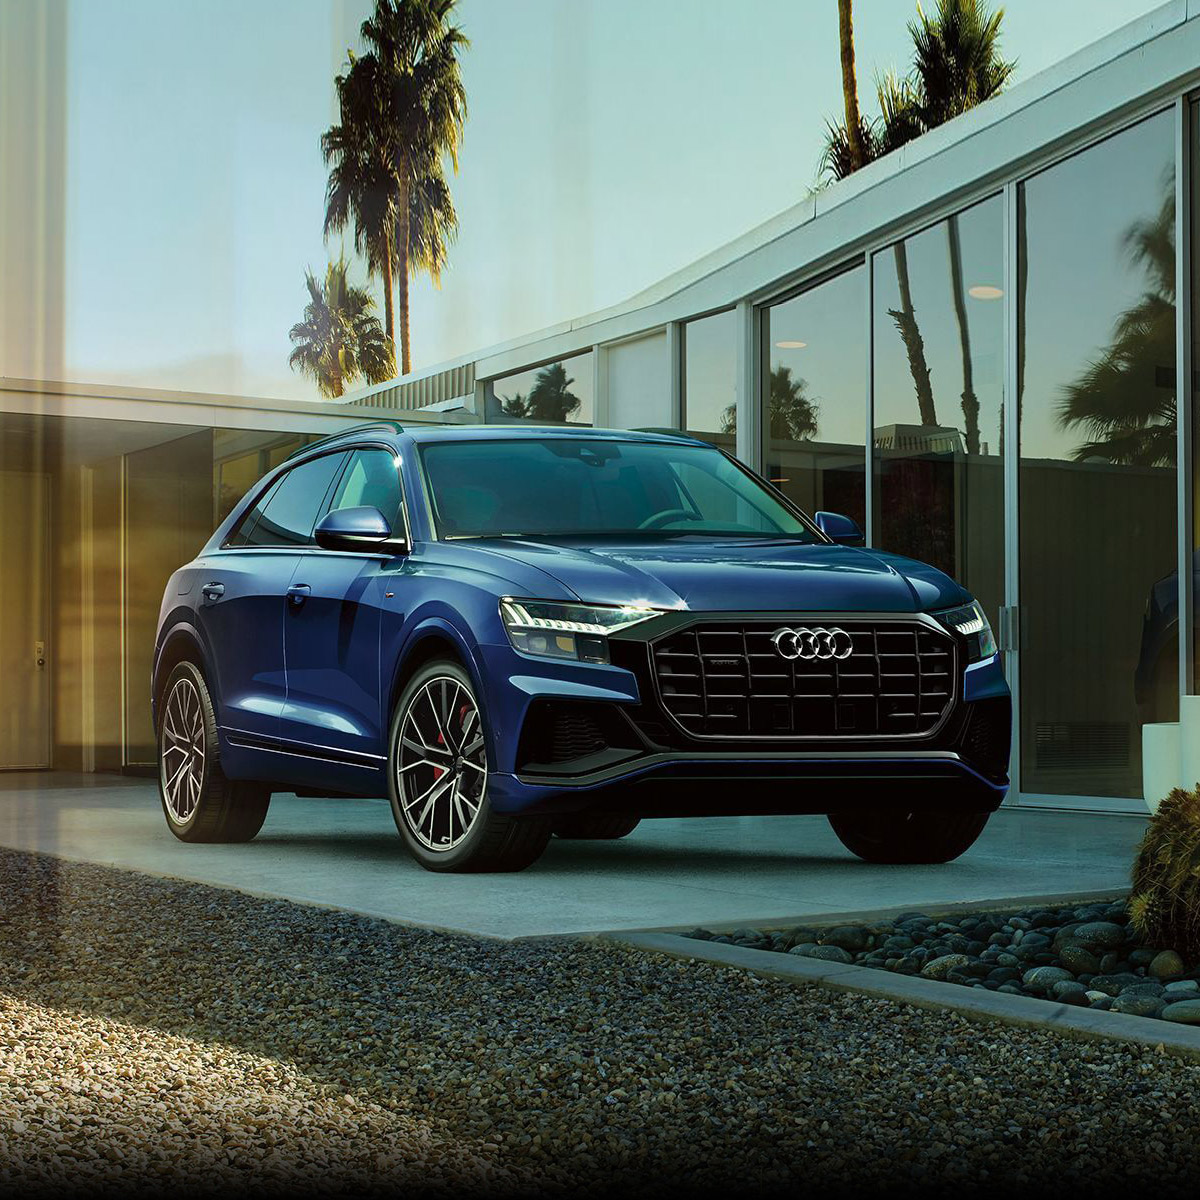 frontal profile of audi Q8 suv in blue color parked in a house driveway with palm trees in the background